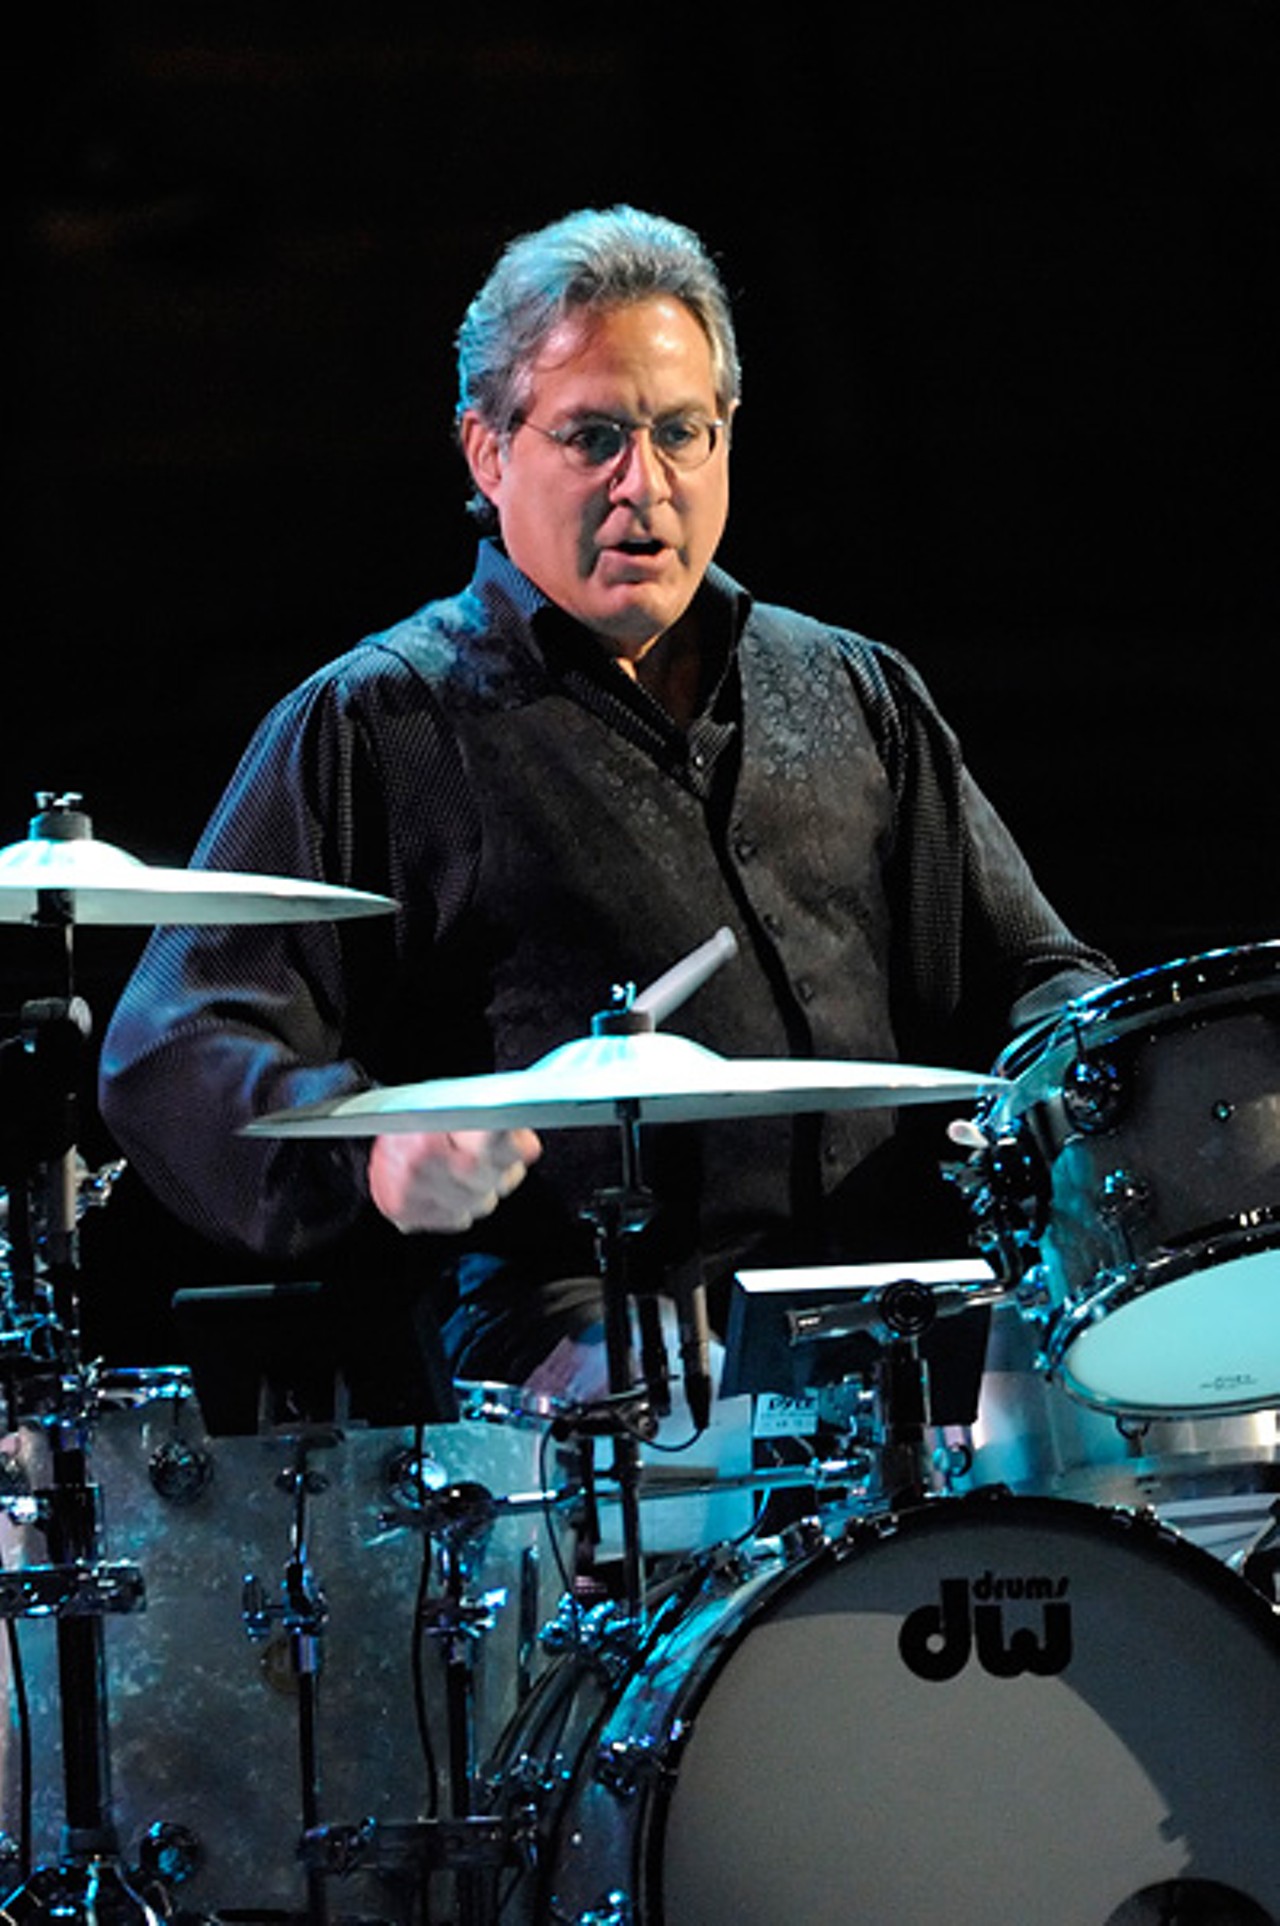 Drummer Max Weinberg of the E Street Band. Weinberg is also leader of the Max Weinberg 7, the house band for Late Night with Conan O'Brien. Read a review of concert.